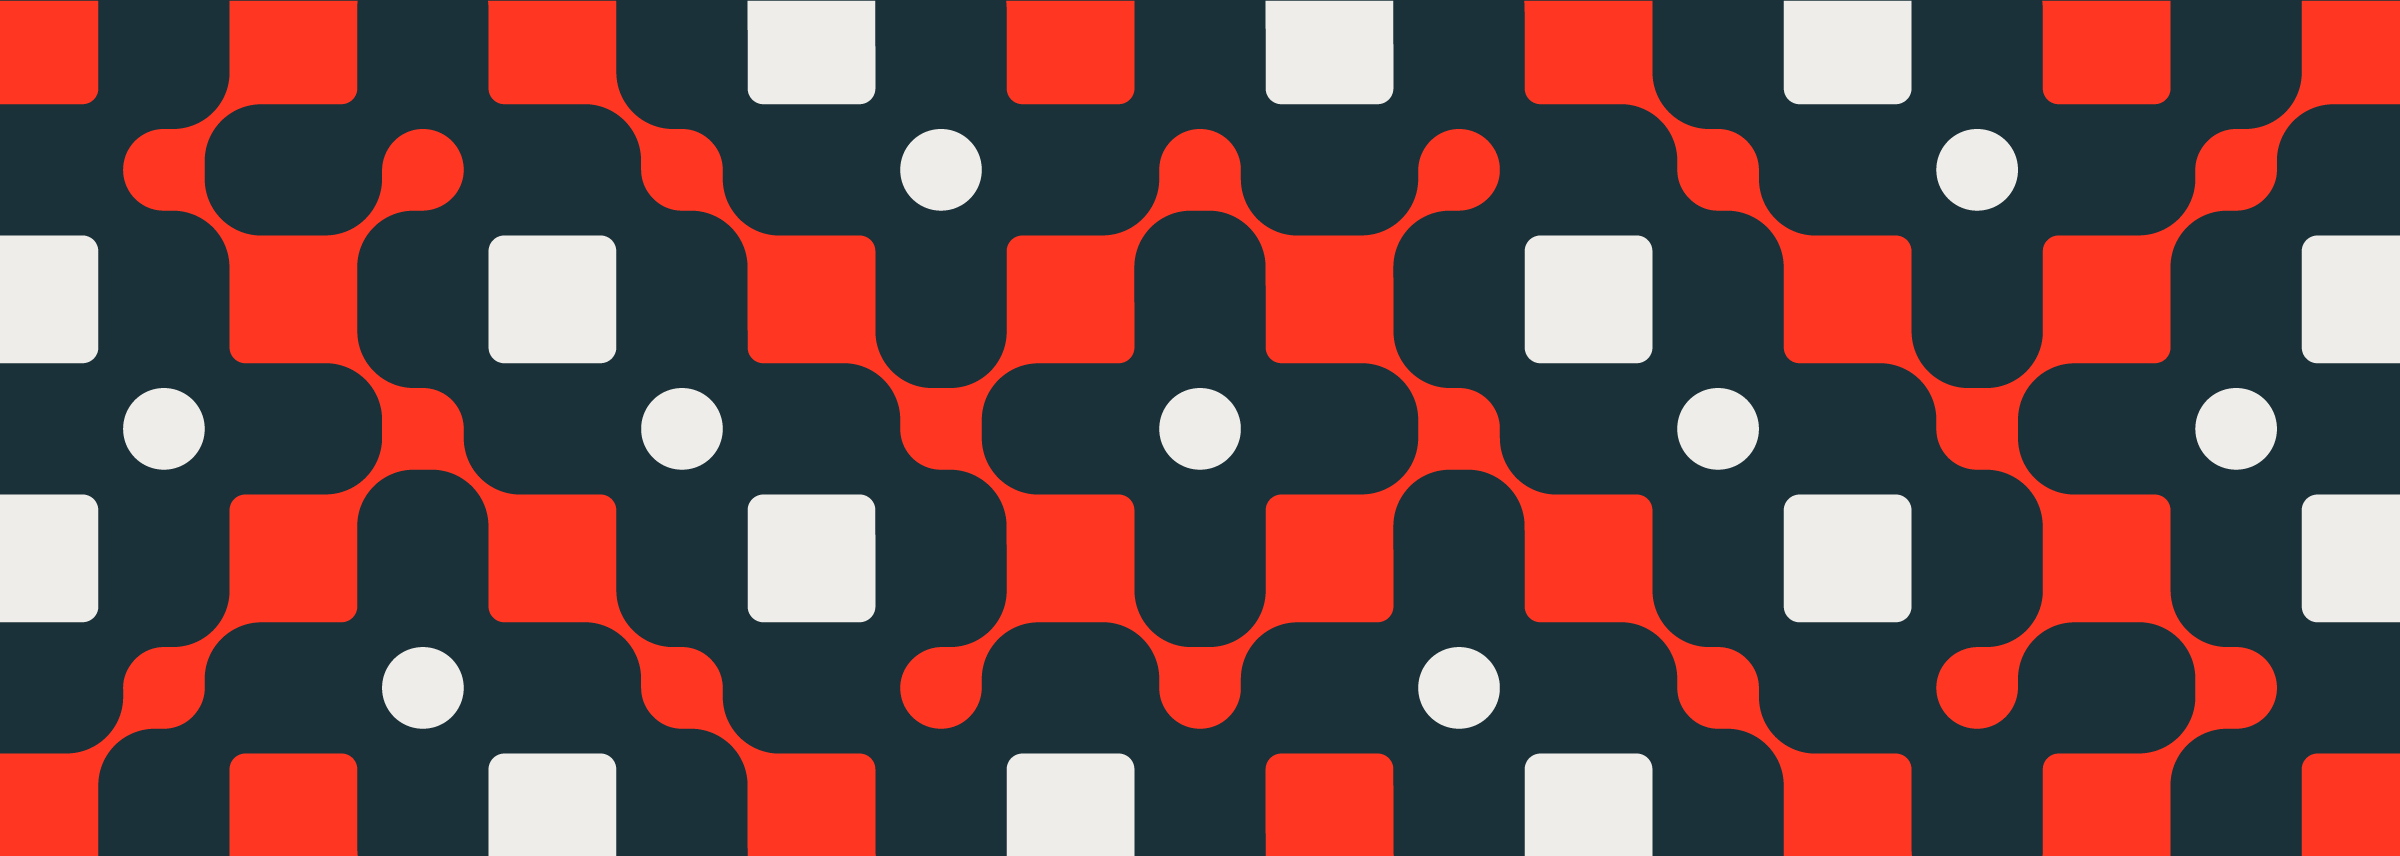 Repeating pattern of diagonally connected red squares with white circles interspersed